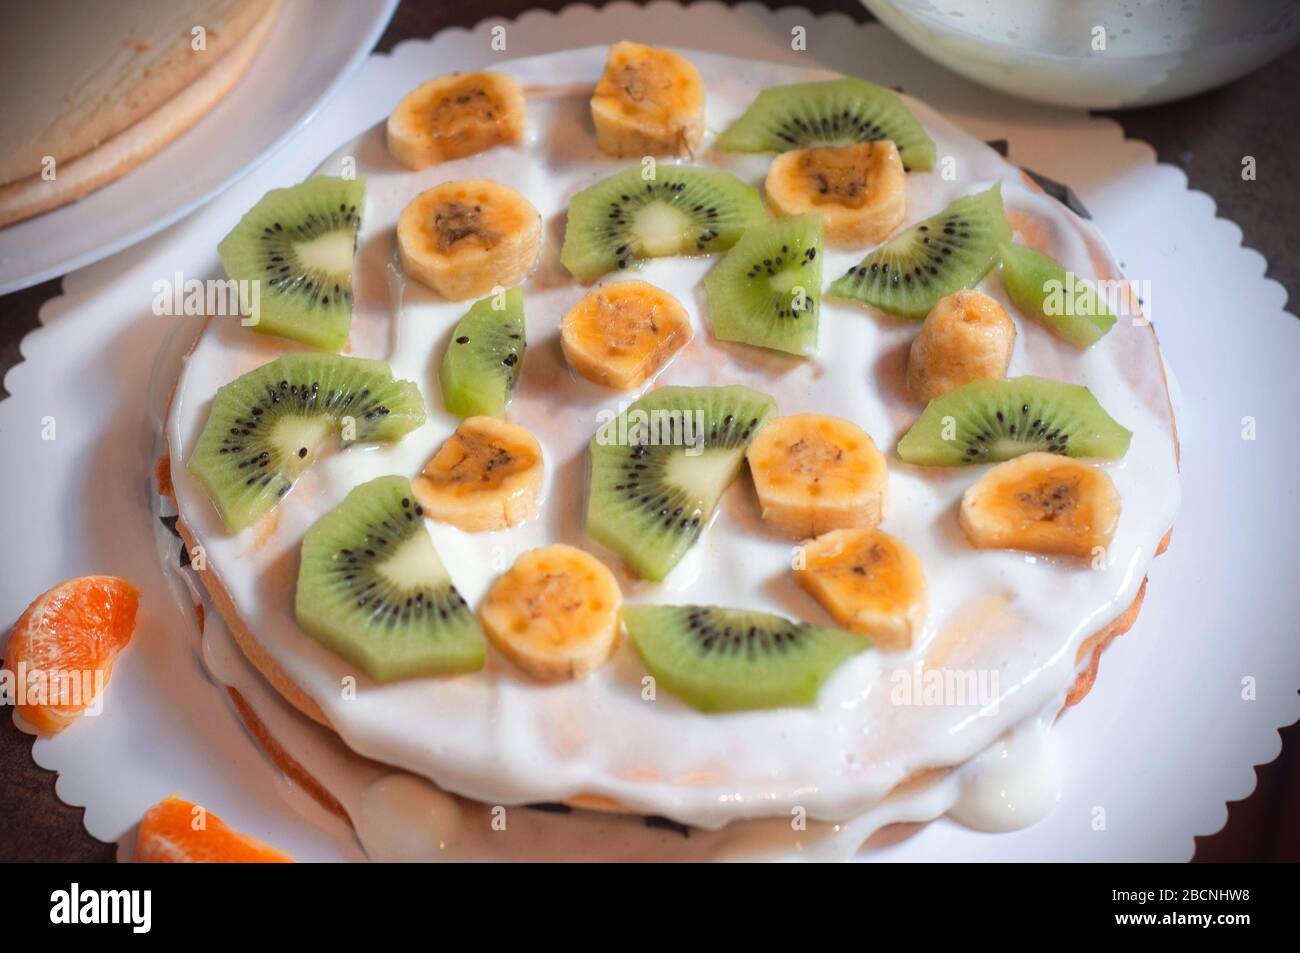 Homemade cake with honey, decorate with exotic fruit: kiwi and banana. Homemade cake with fruit Stock Photo